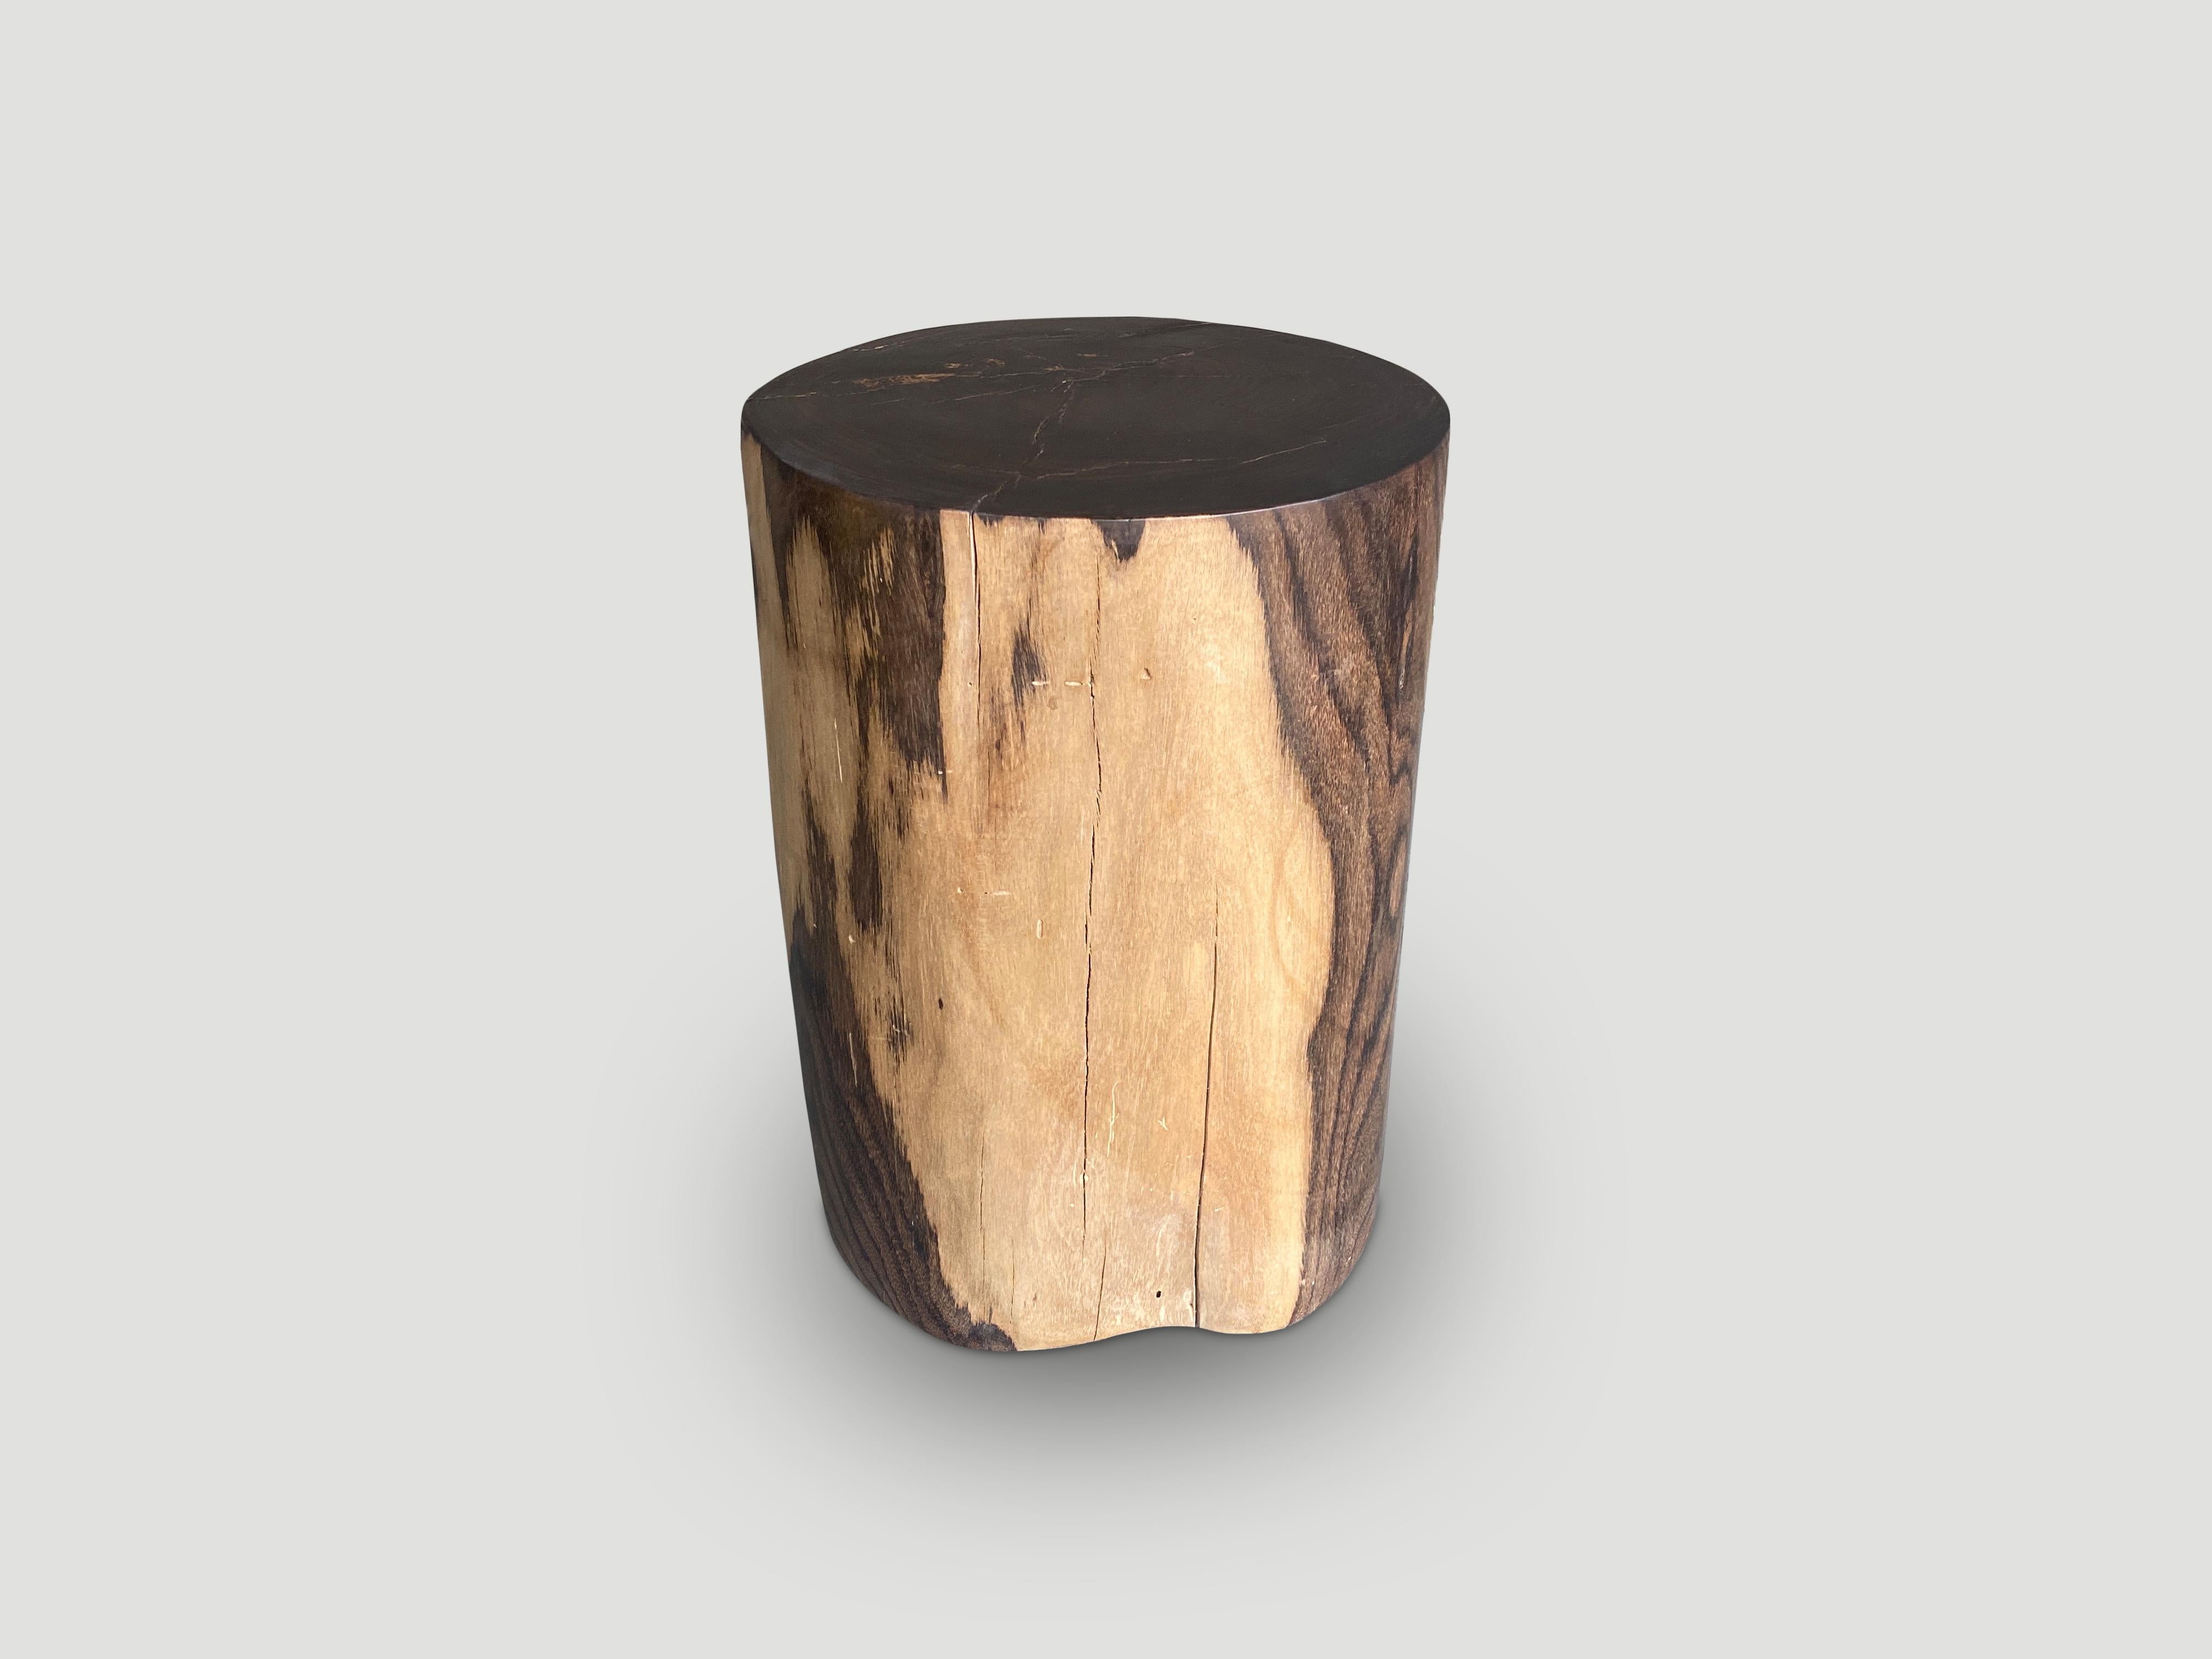 Exquisite rosewood side table with stunning contrasting tones. Finished with a natural oil revealing the beautiful wood grain. We have a collection. The price and images reflect the one shown. 

Own an Andrianna Shamaris original.

Andrianna